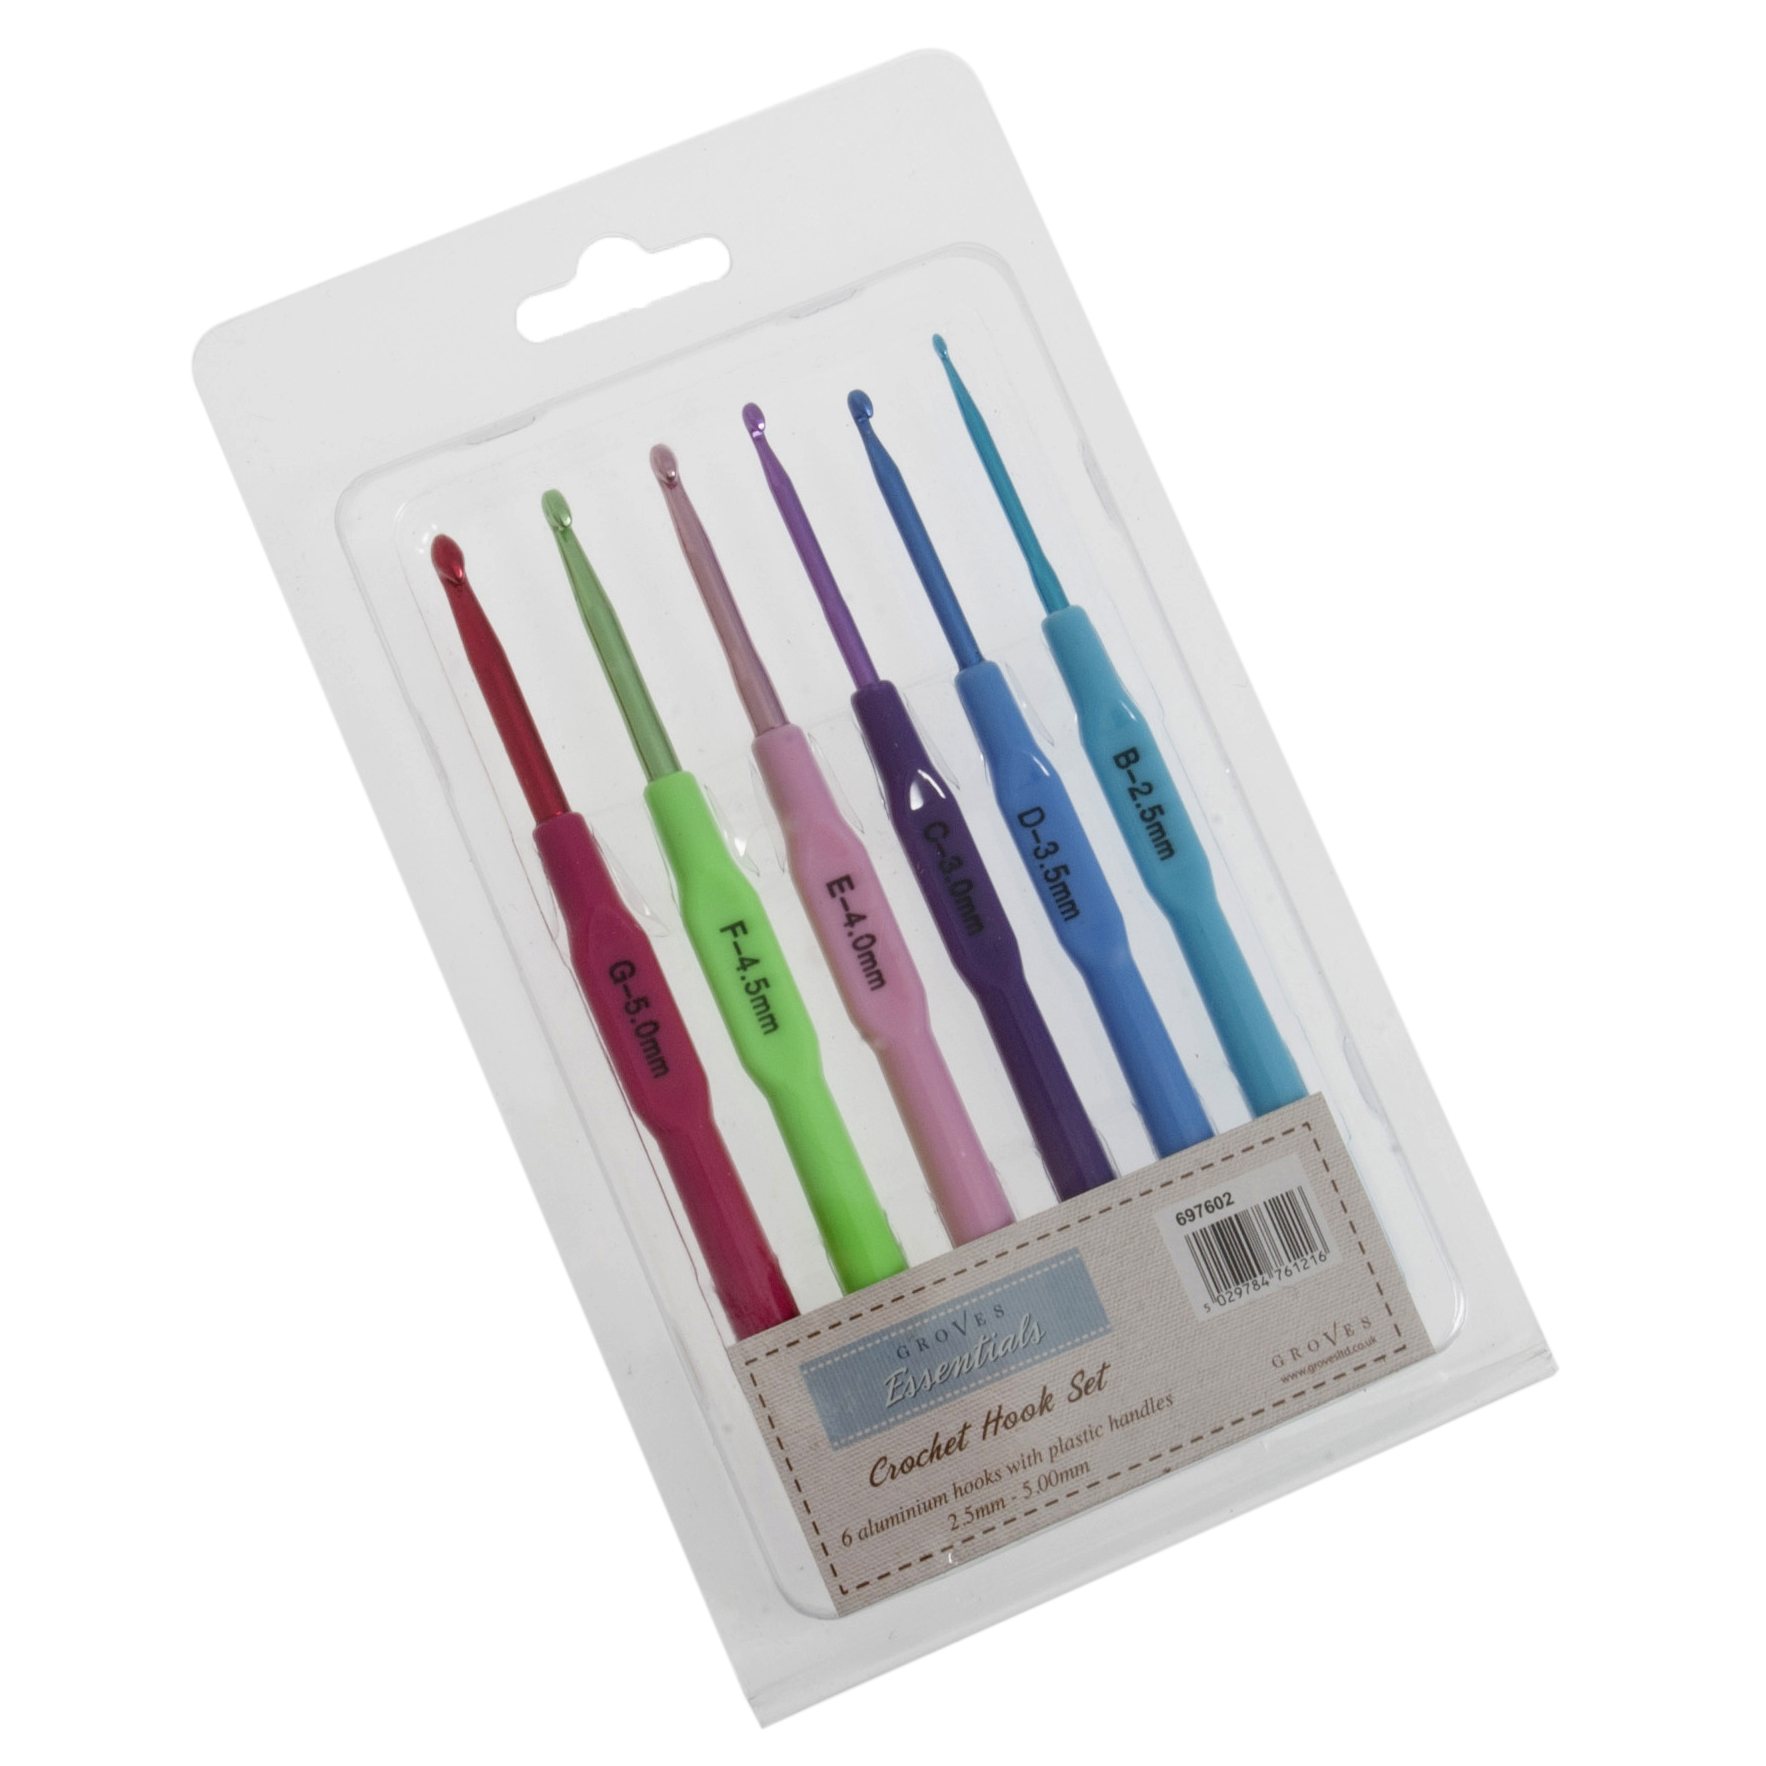 Crochet Hook Set (6 Piece) - Groves - Groves and Banks